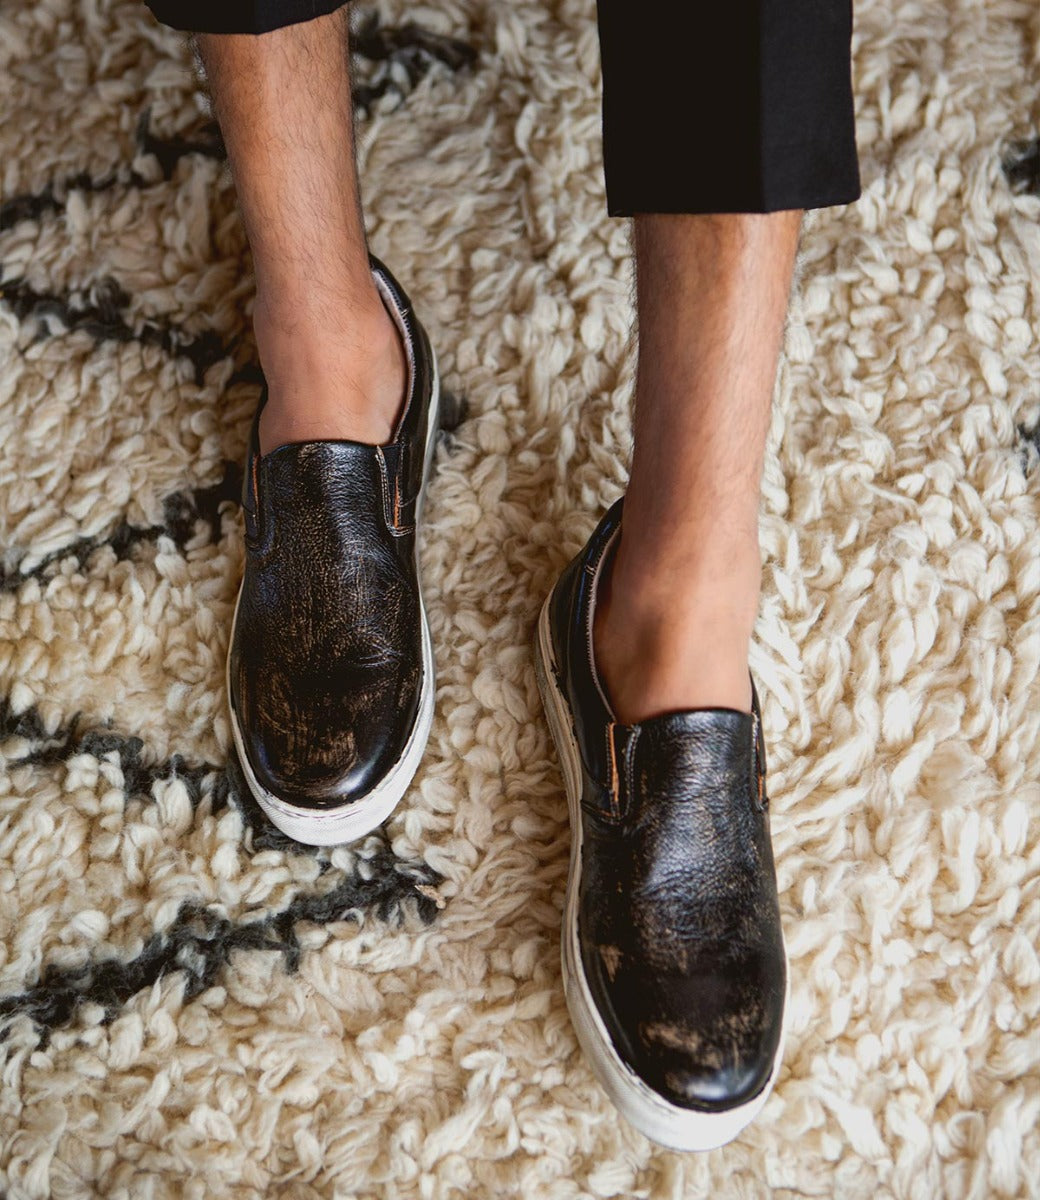 A man wearing a pair of black Harry slip on sneakers by Bed Stu on a rug.